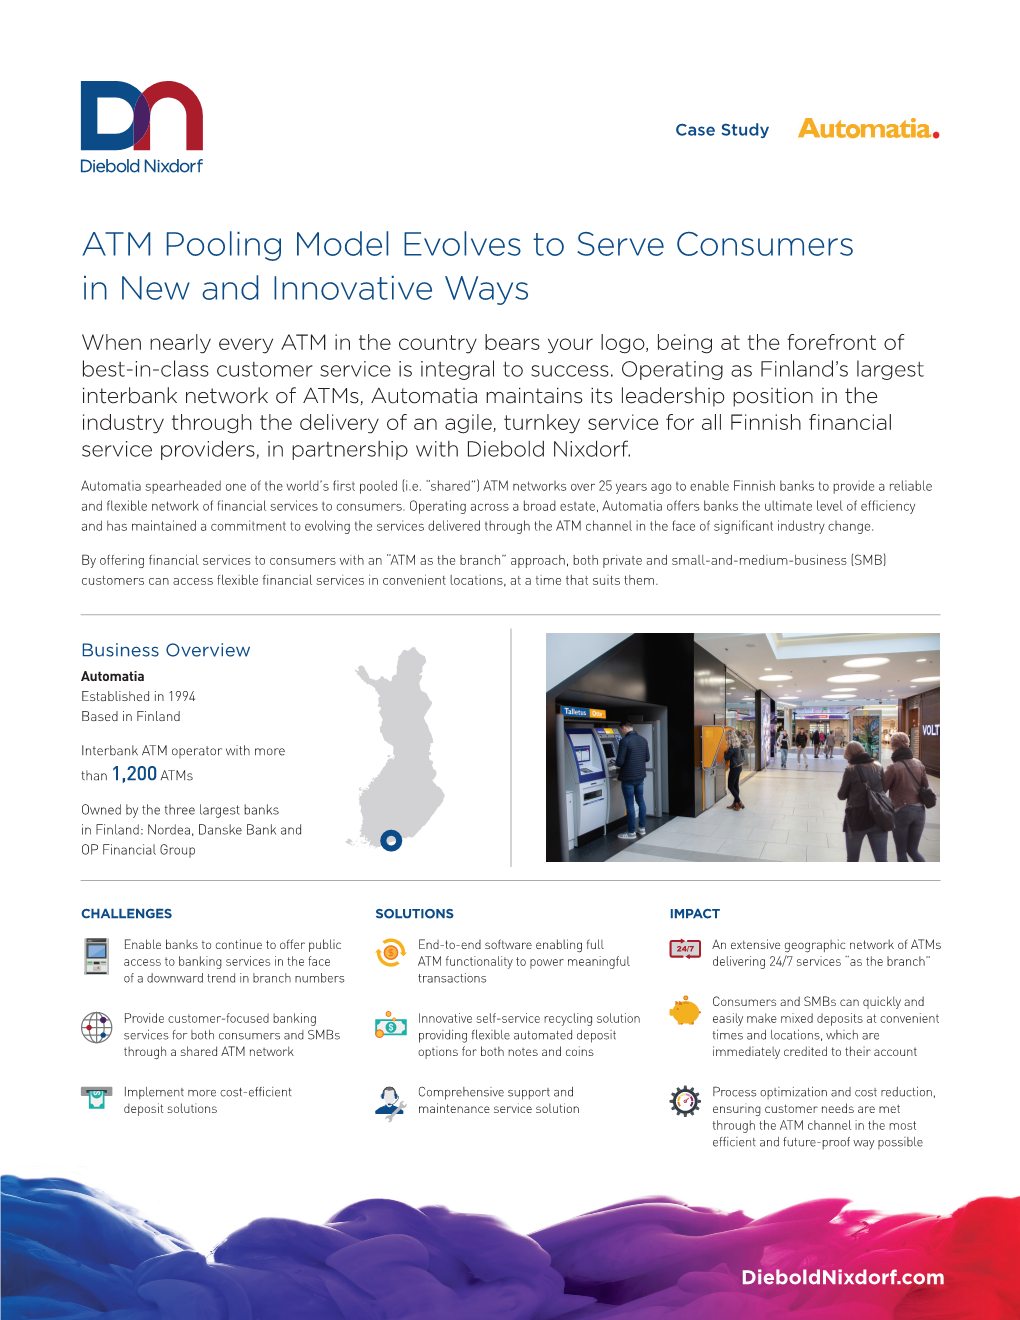 ATM Pooling Model Evolves to Serve Consumers in New and Innovative Ways